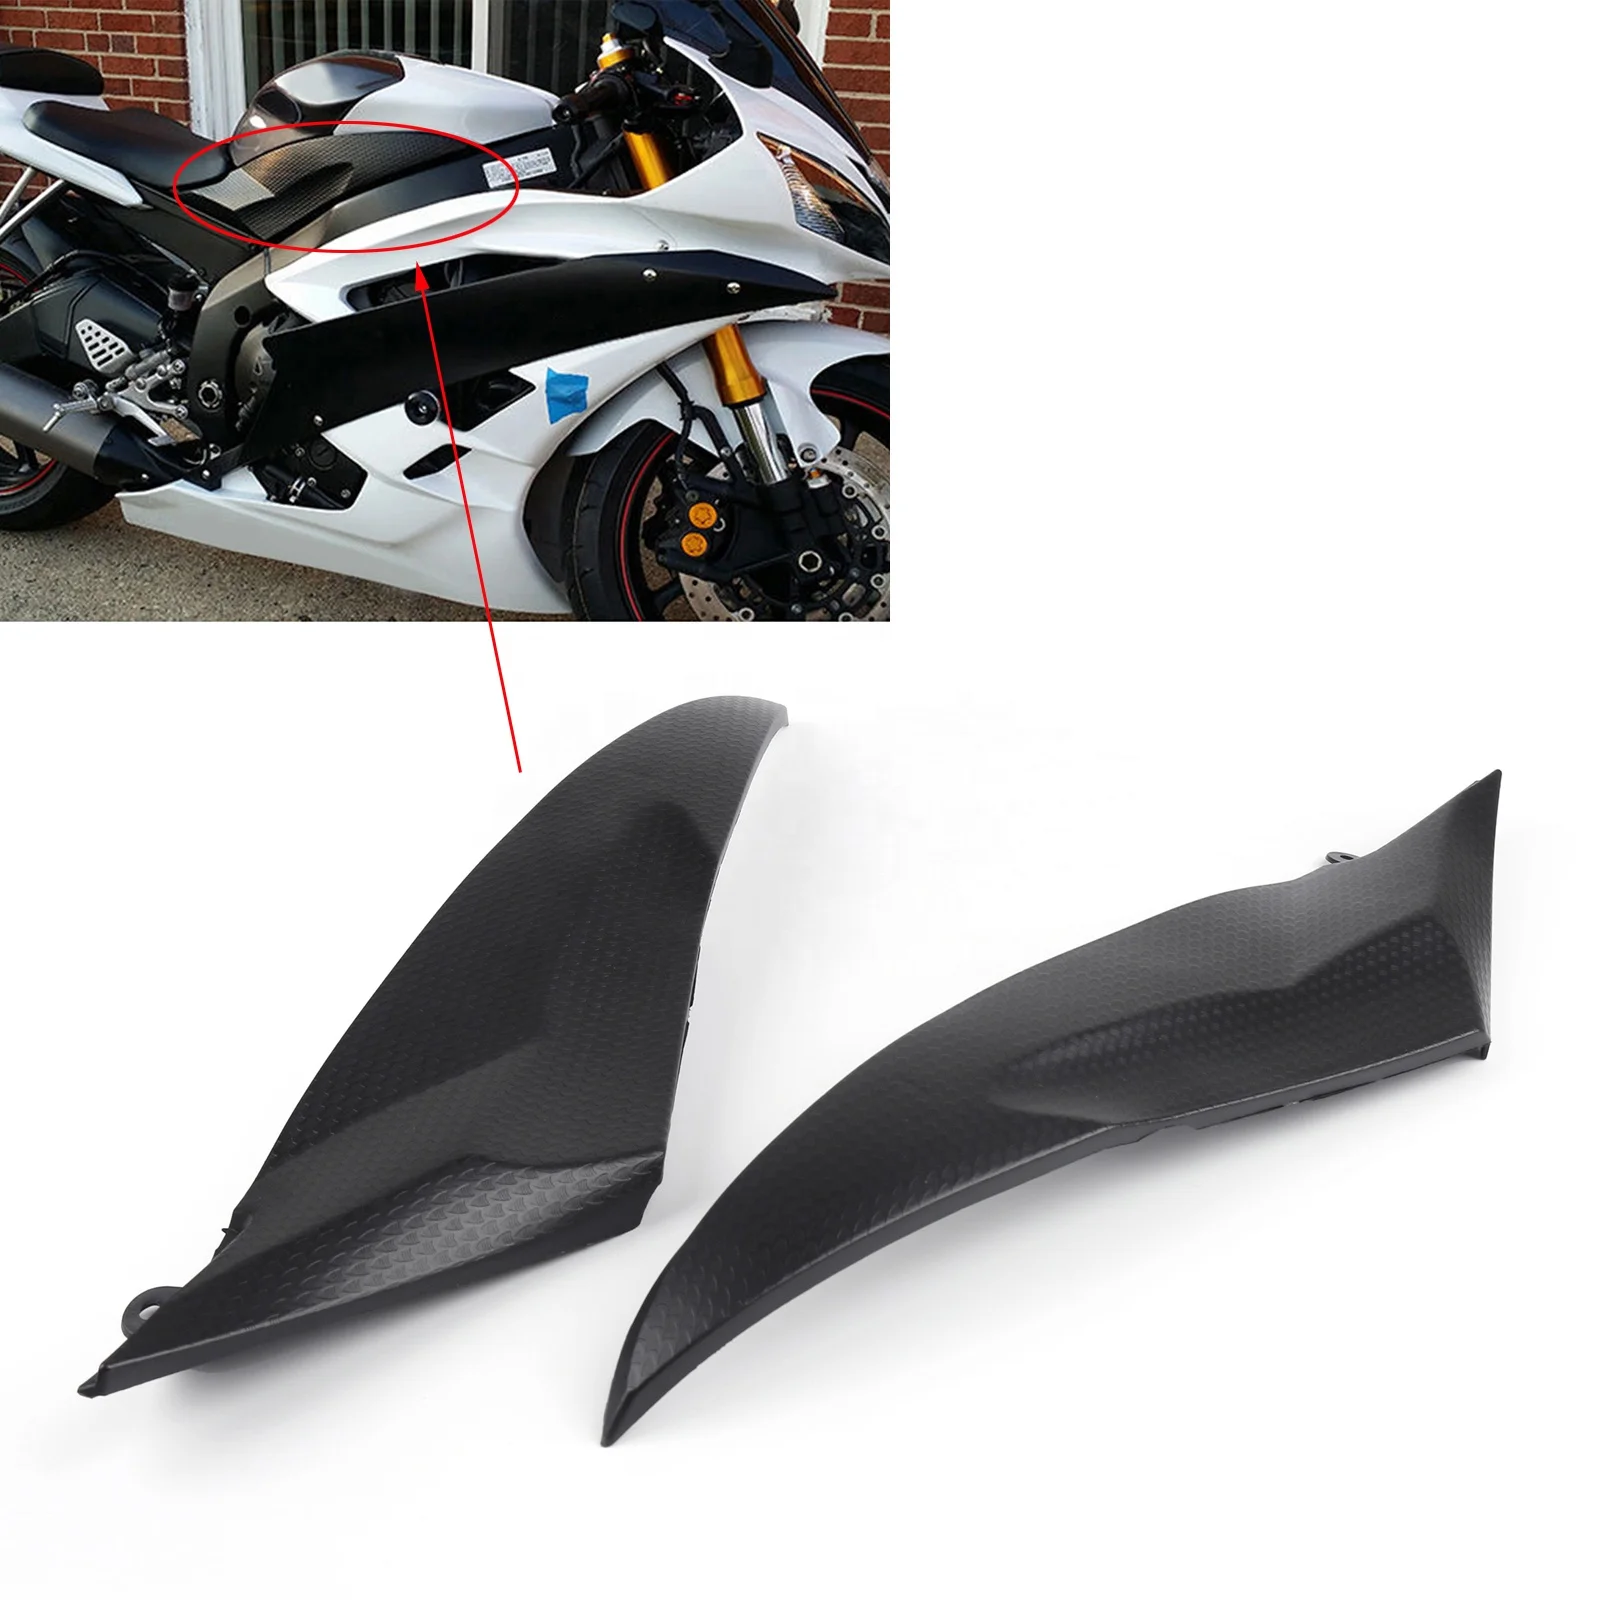 

Free Shipping Tank Side Fairing Panel Gas Tank Cover For Yamaha 2006 2007 YZF R6 2006-2007, Black